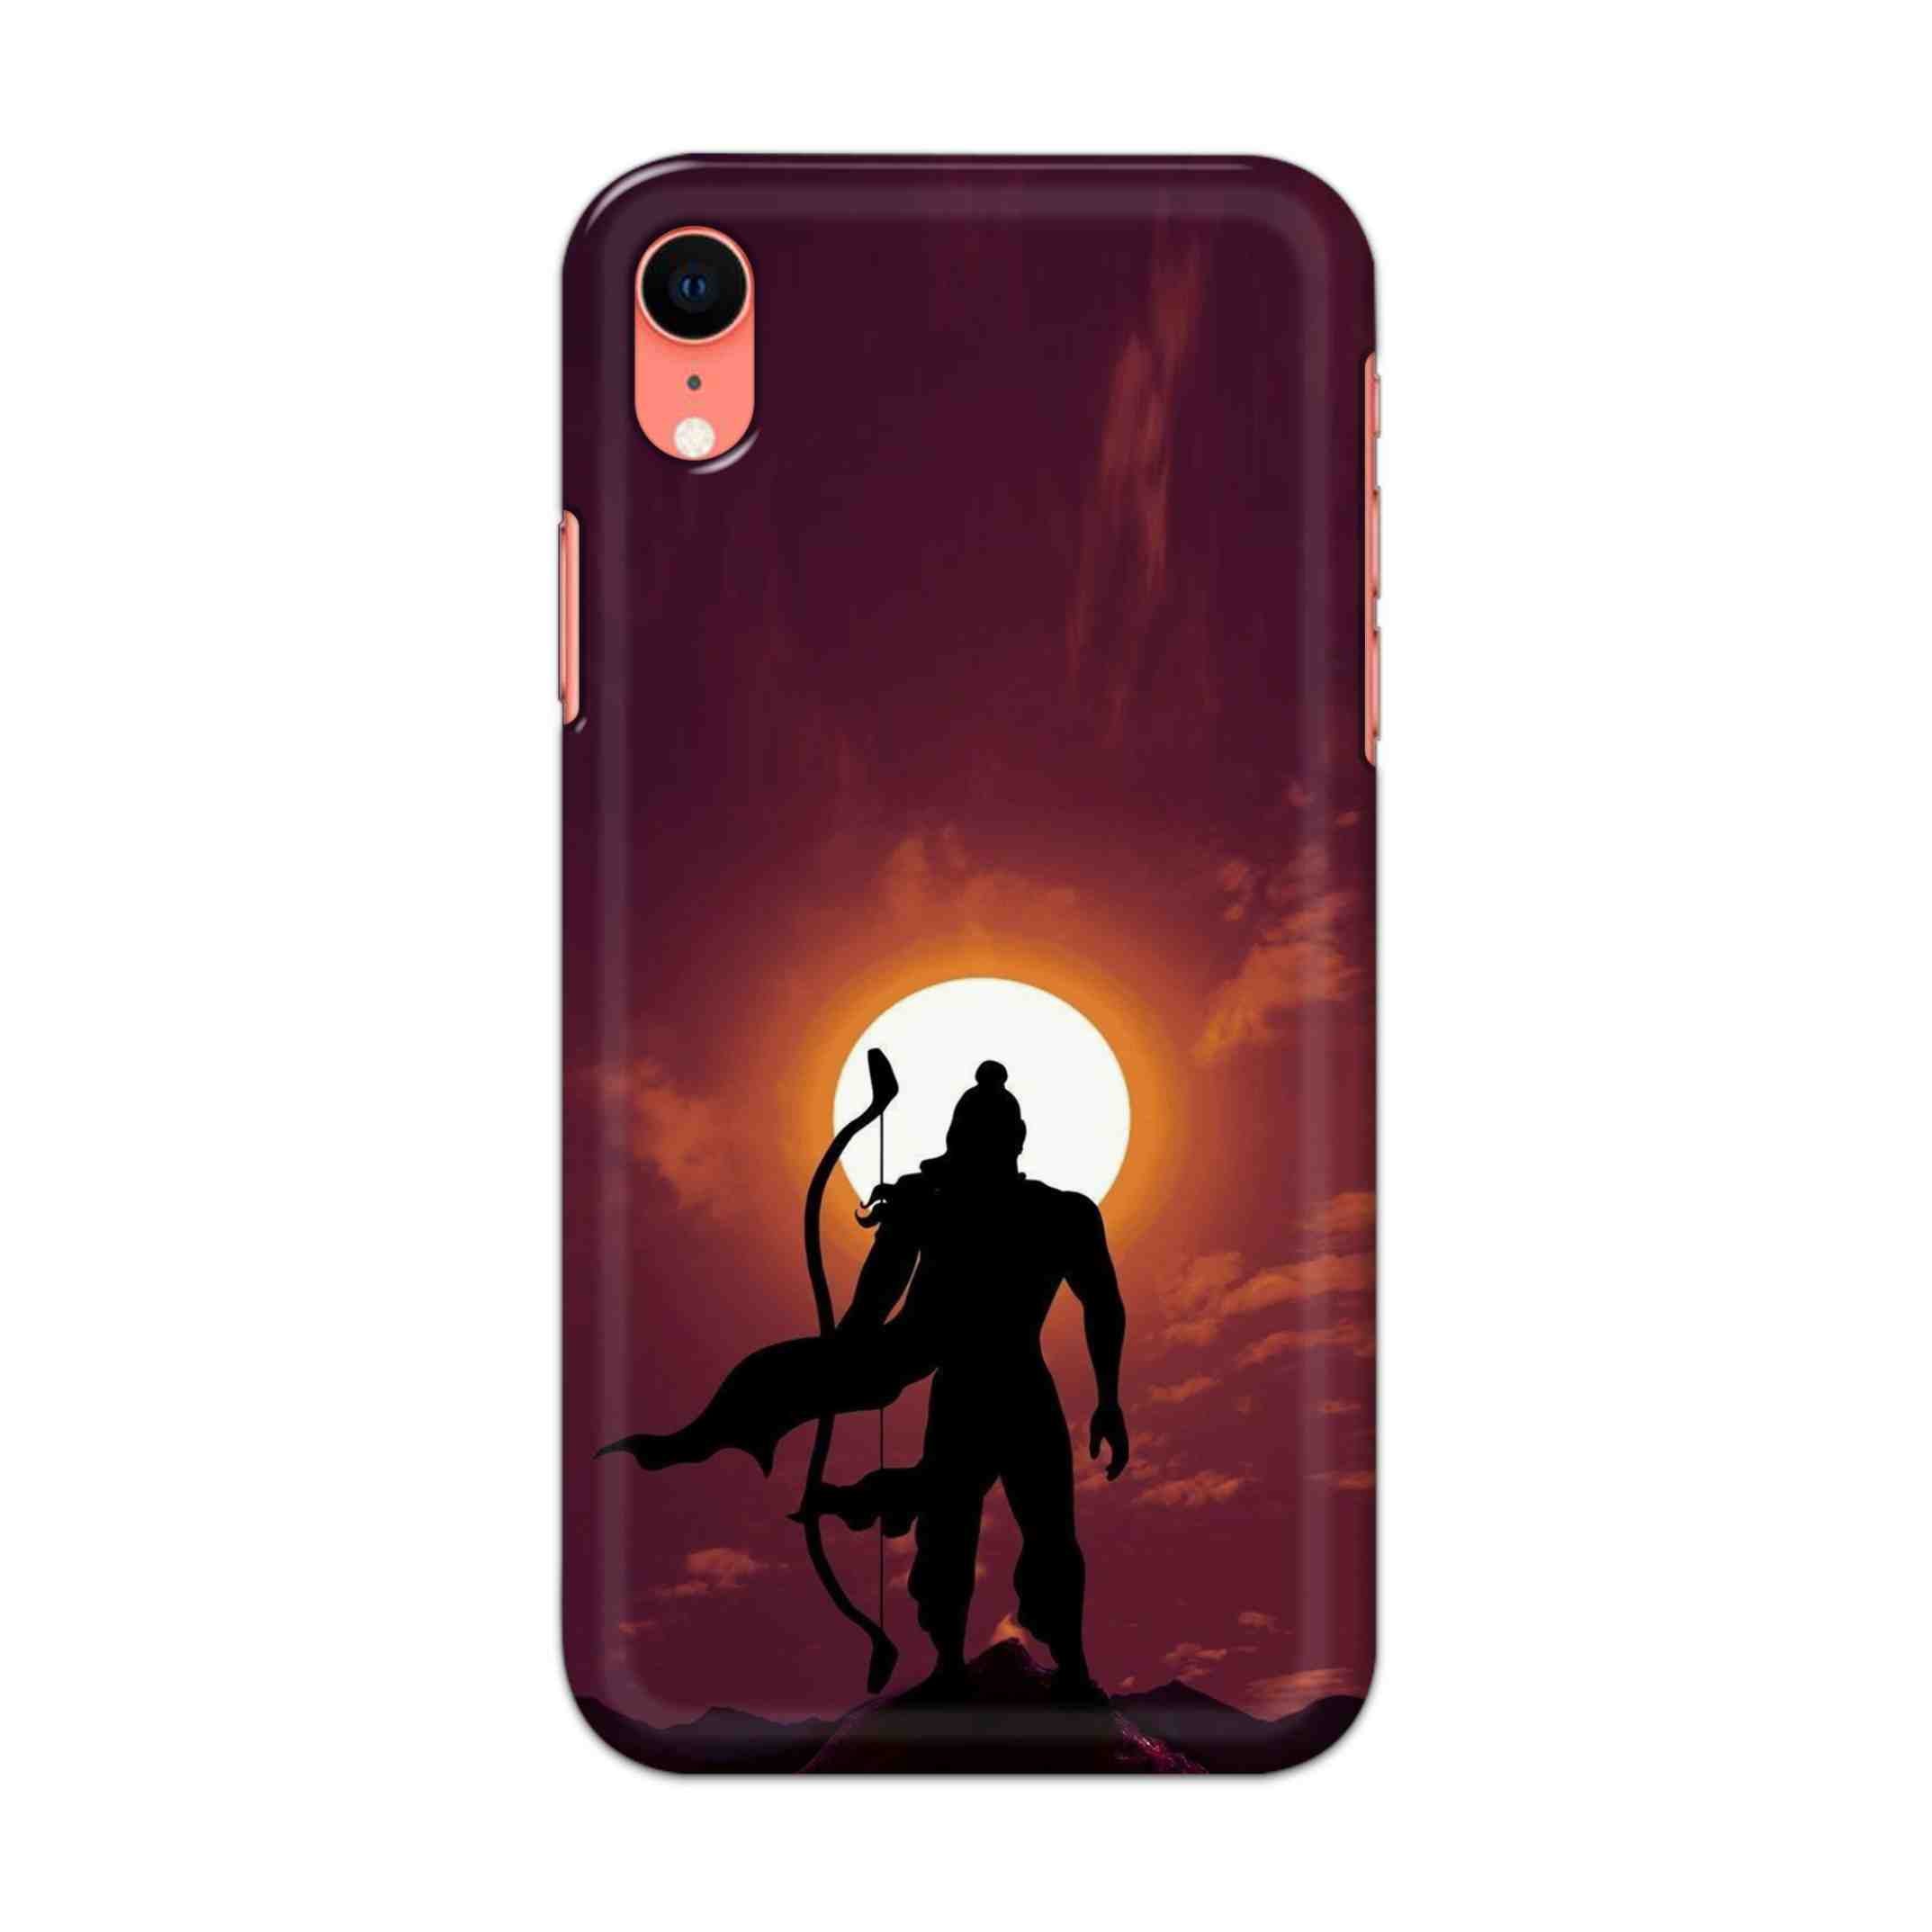 Buy Ram Hard Back Mobile Phone Case/Cover For iPhone XR Online